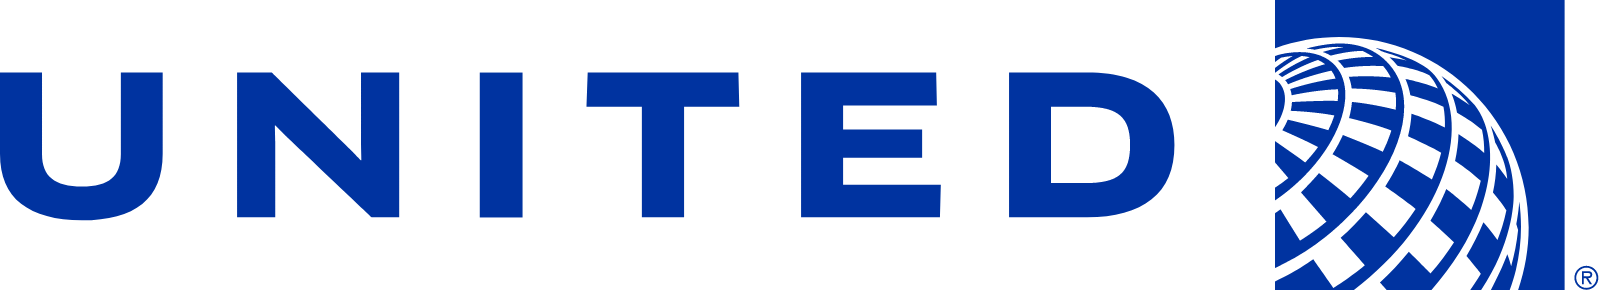 United Airlines Holdings
 logo large (transparent PNG)